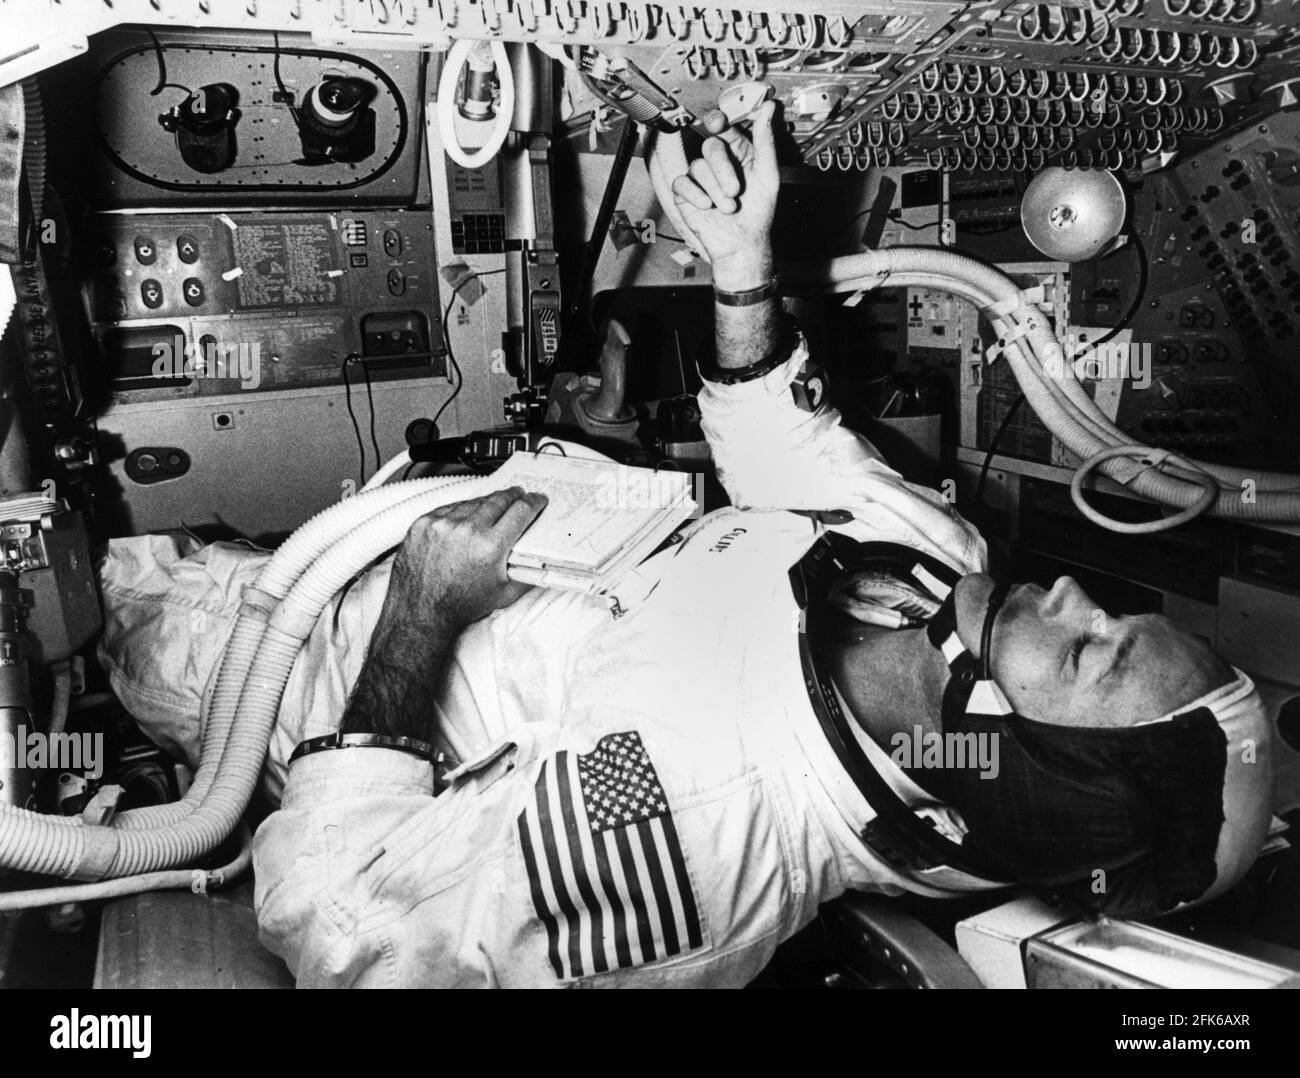 Cape Canaviral, Florida, USA. 15th July, 1969. American astronaut MICHAEL COLLINS, born October 31, 1930, will be on board of Apollo 11, on the historic journey to the moon. PICTURED: Collins preparing for launch. Credit: Keystone Press Agency/ZUMA Wire/Alamy Live News Stock Photo